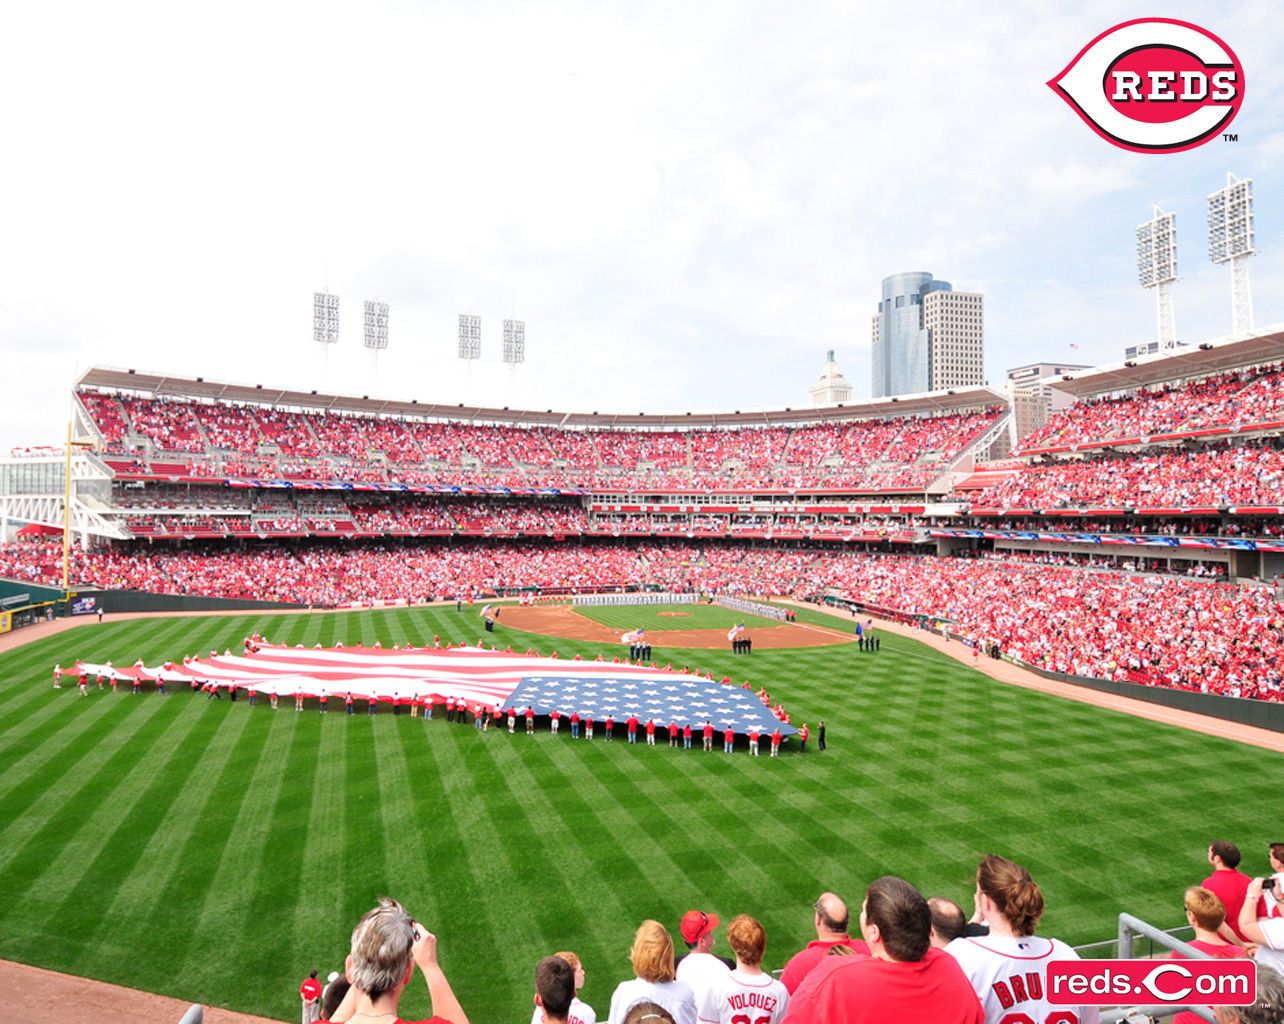 Great American Ball Park Wallpapers - Wallpaper Cave